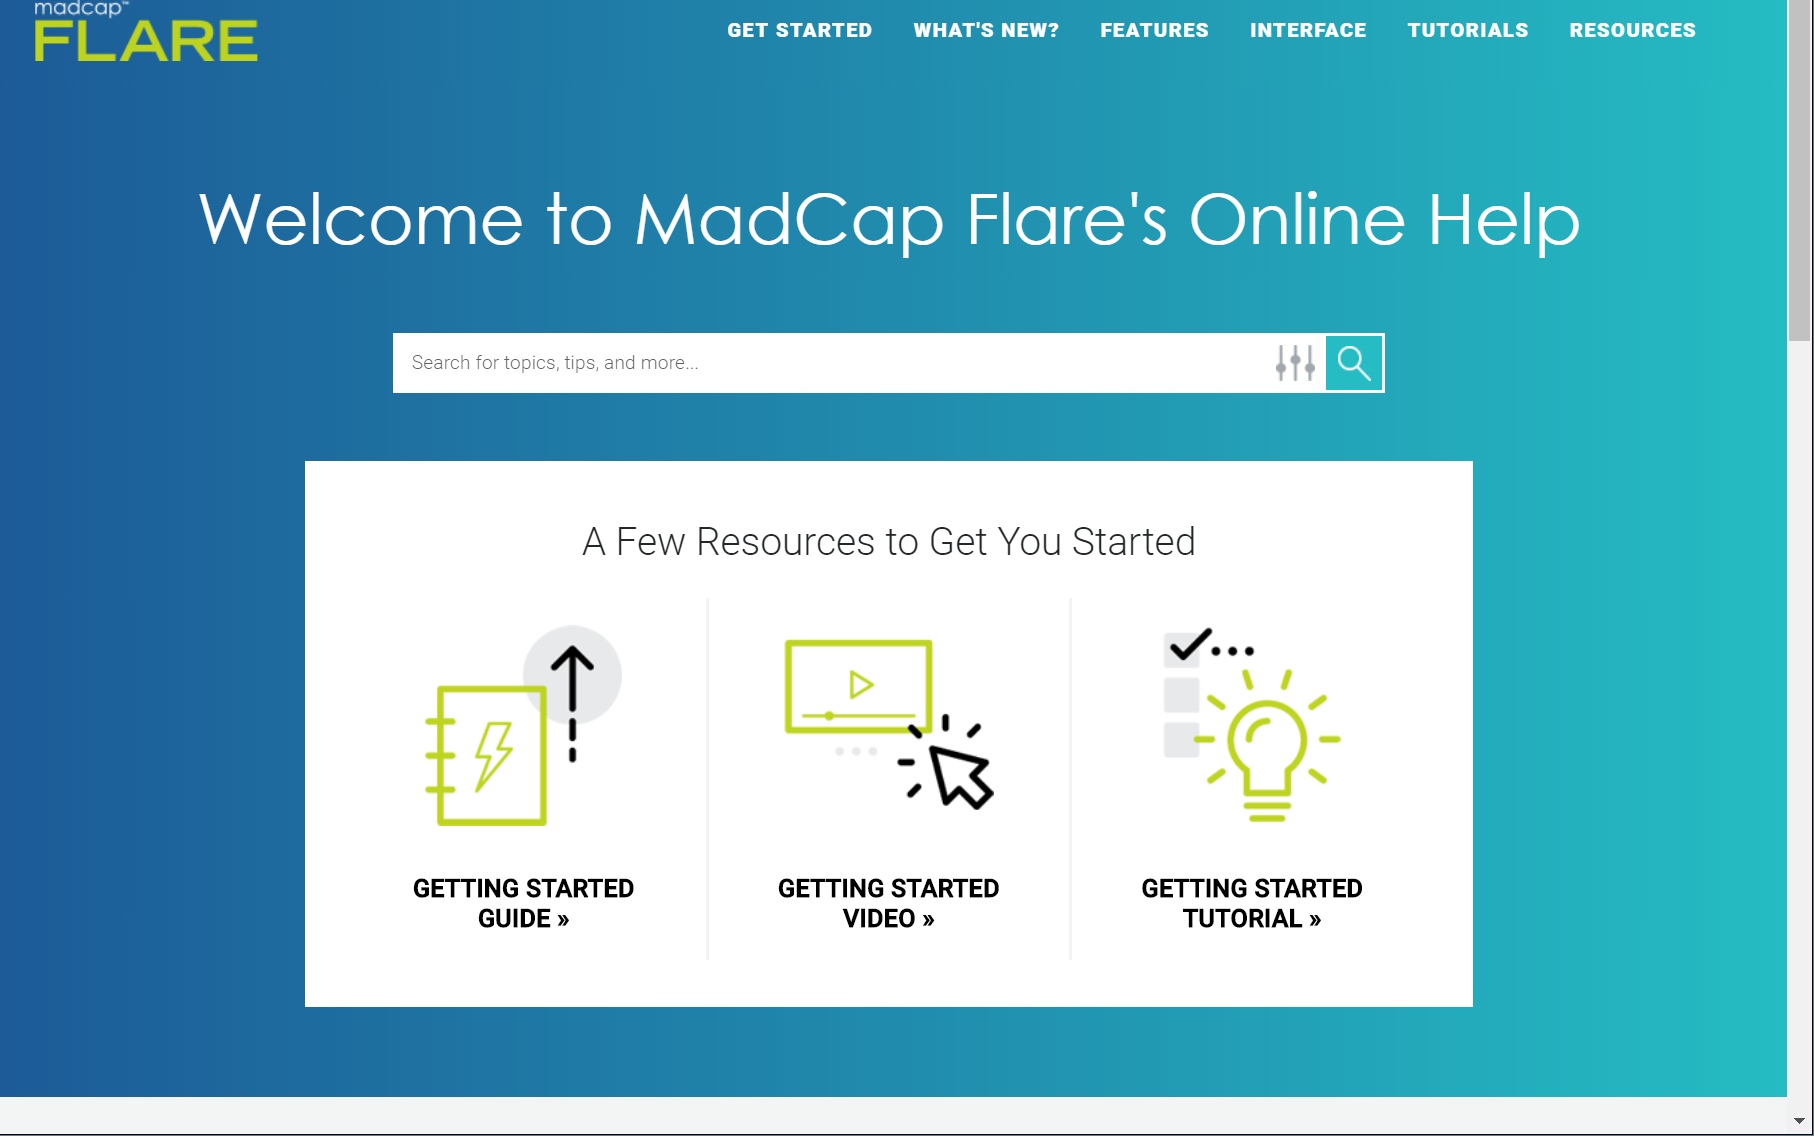 New Home page of MadCap Flare's Help